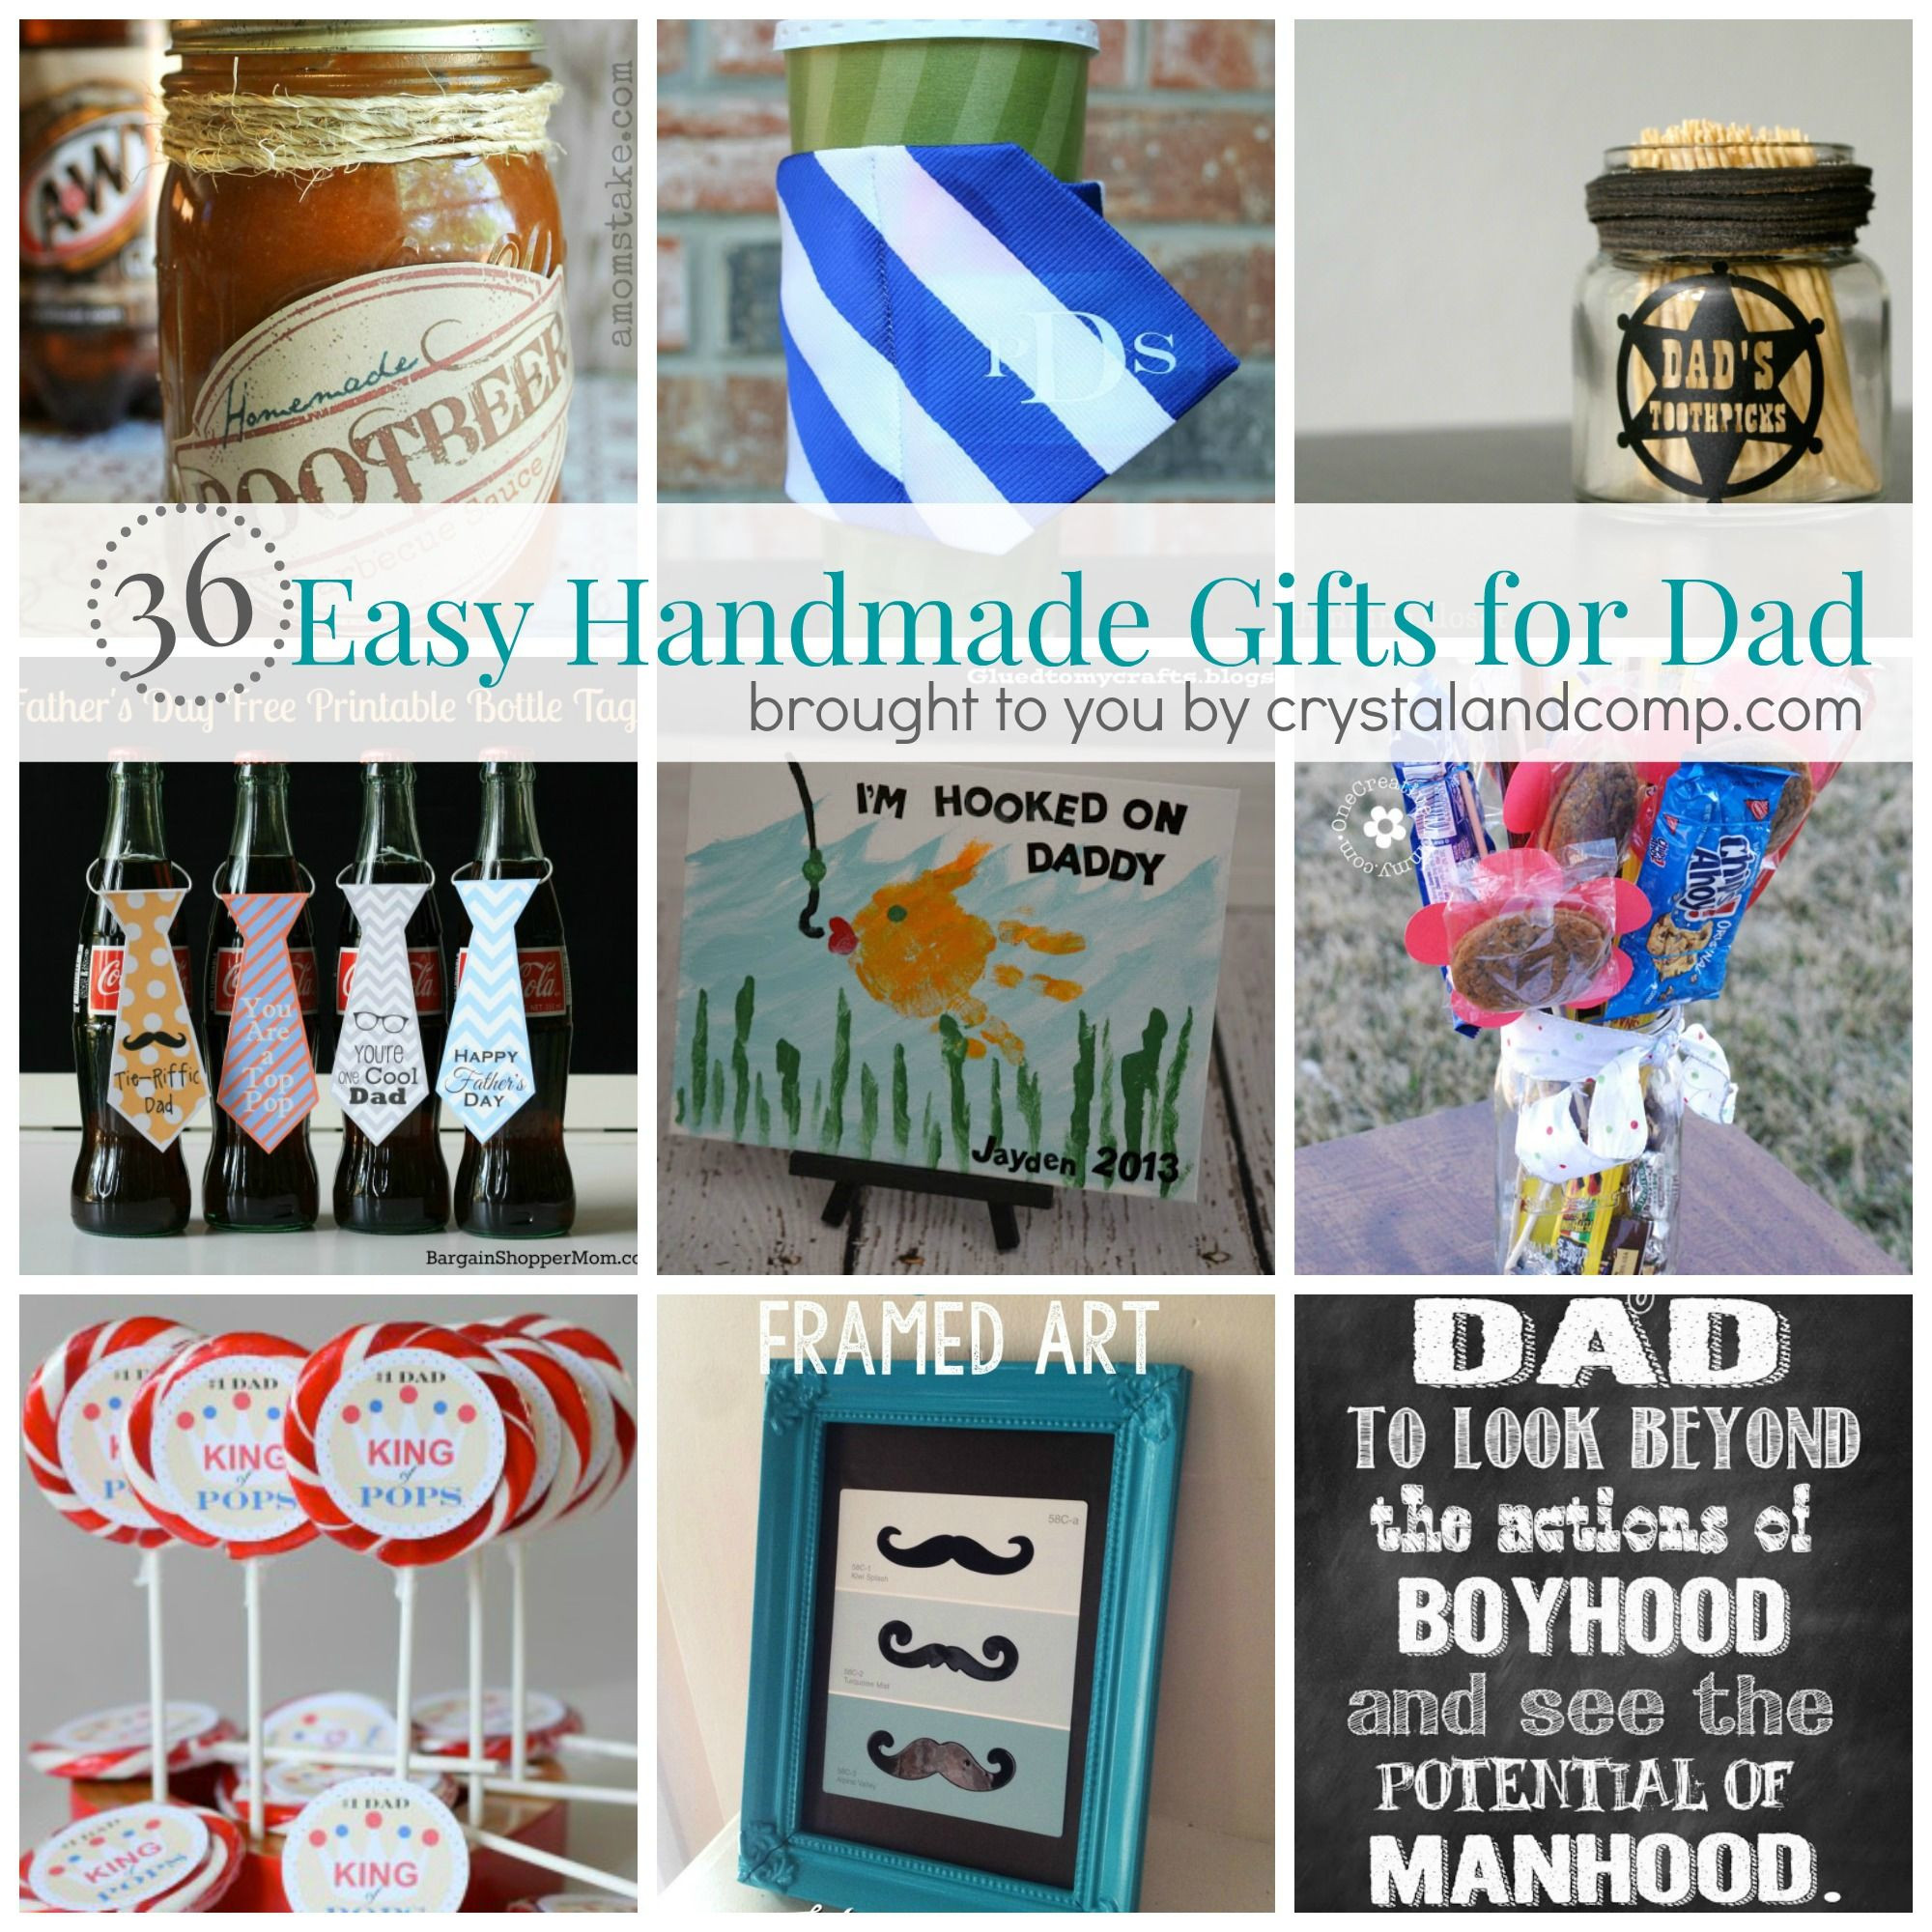 DIY Gift Ideas For Dads
 36 Easy Handmade Gift Ideas for Dad